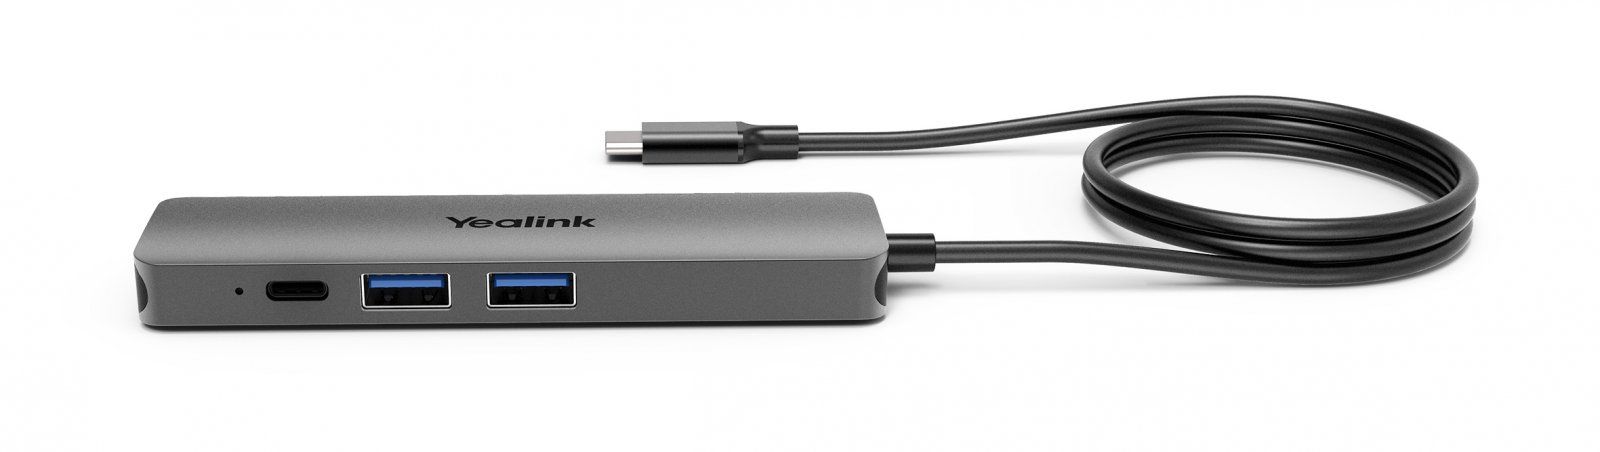 Yealink BYOD-BOX cable hub with 1.5m USB-Ccable 1300004 photo